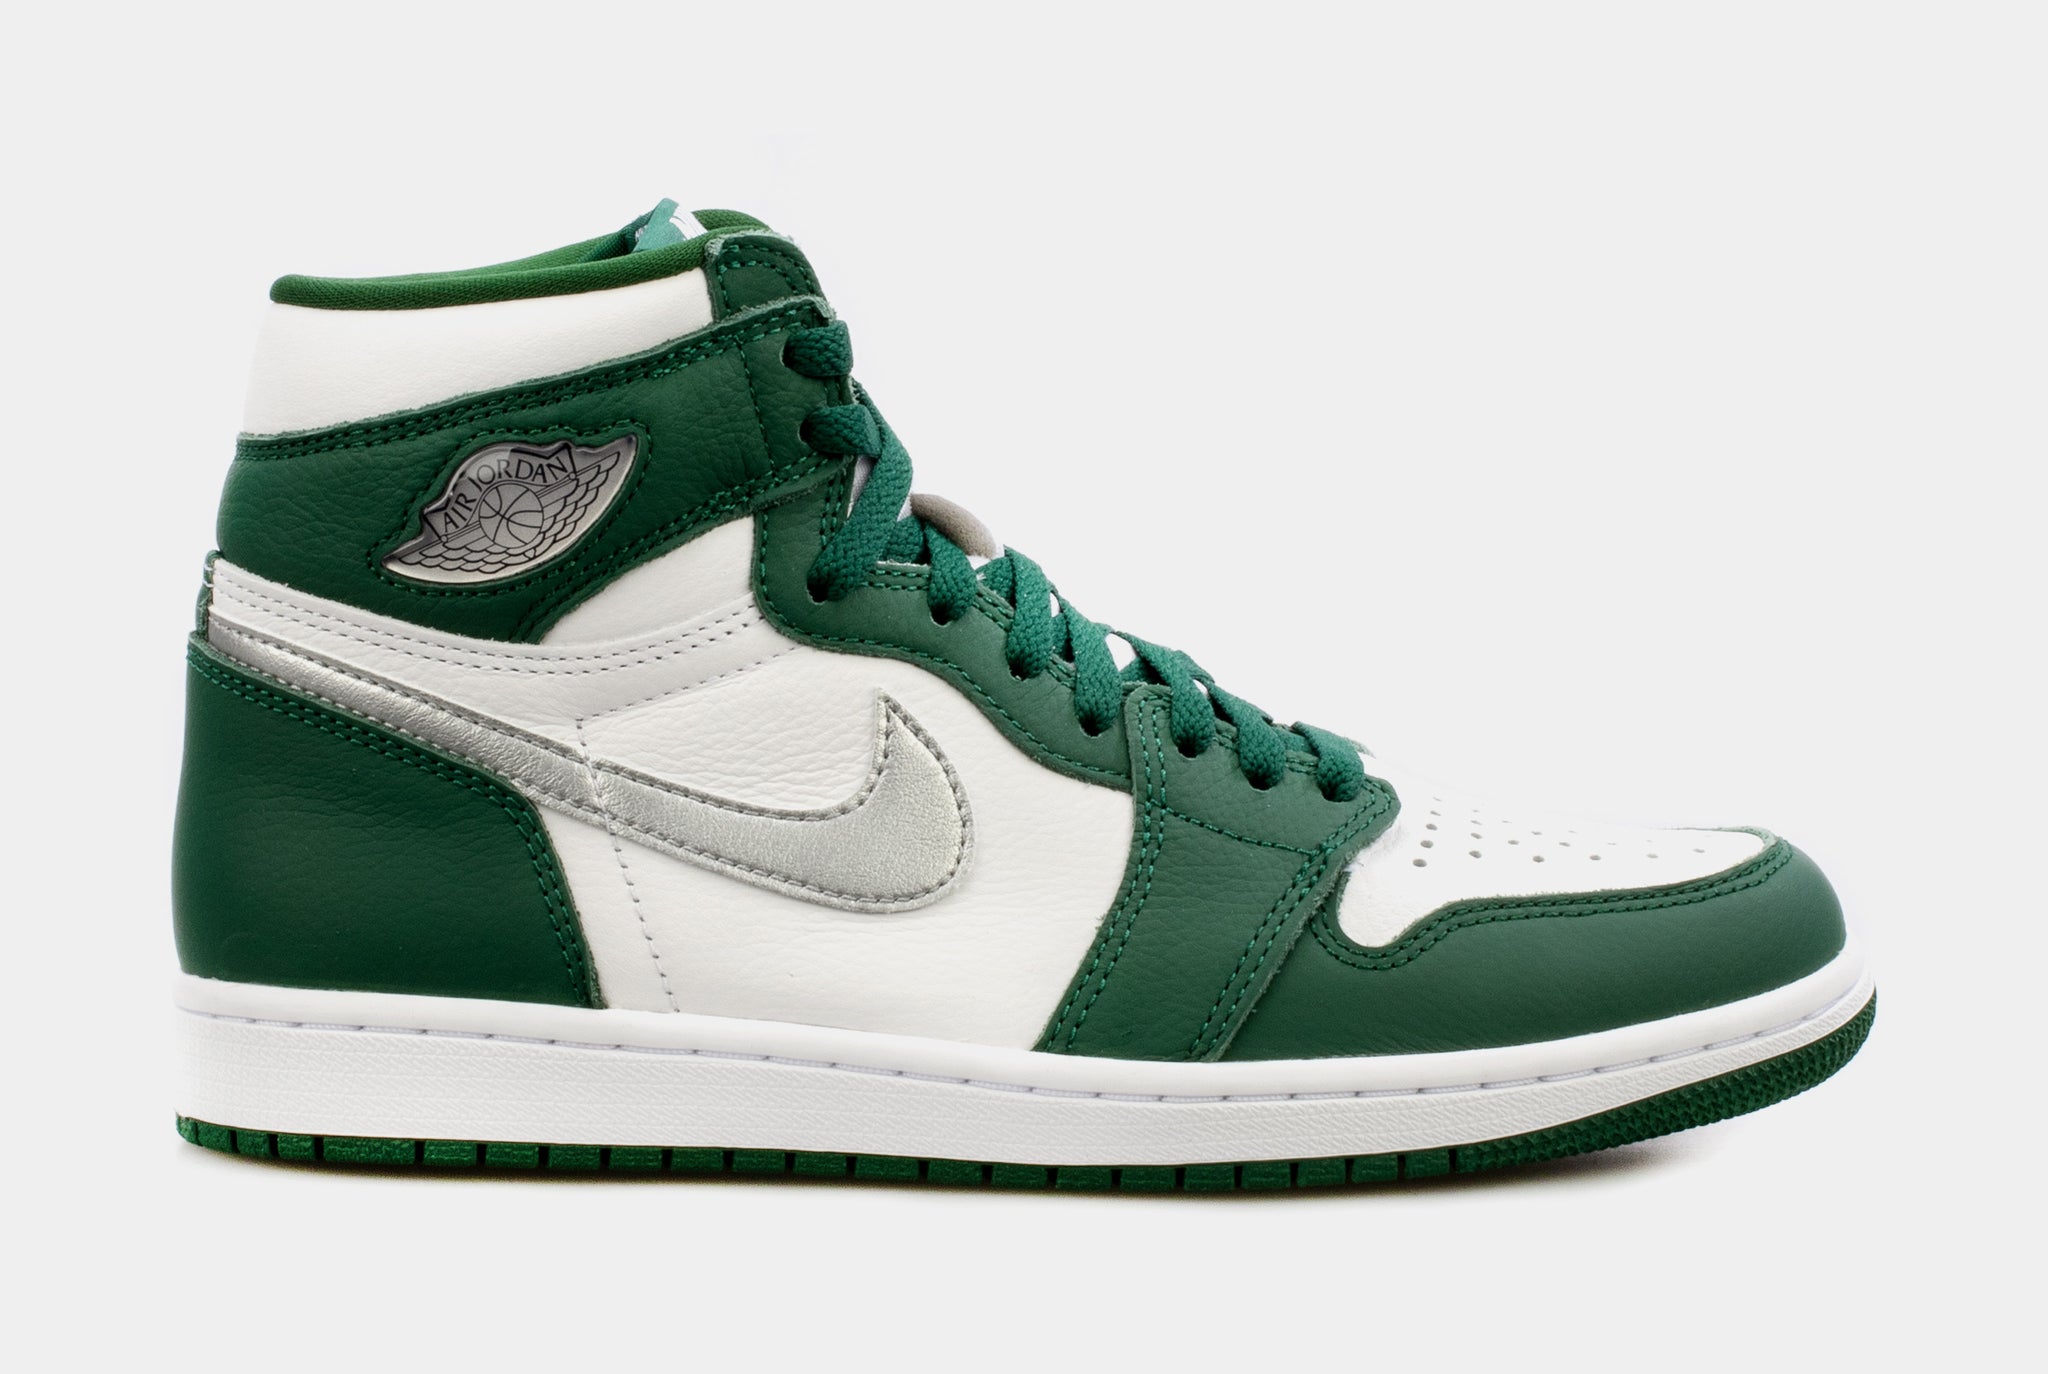 green and white jordan shoes